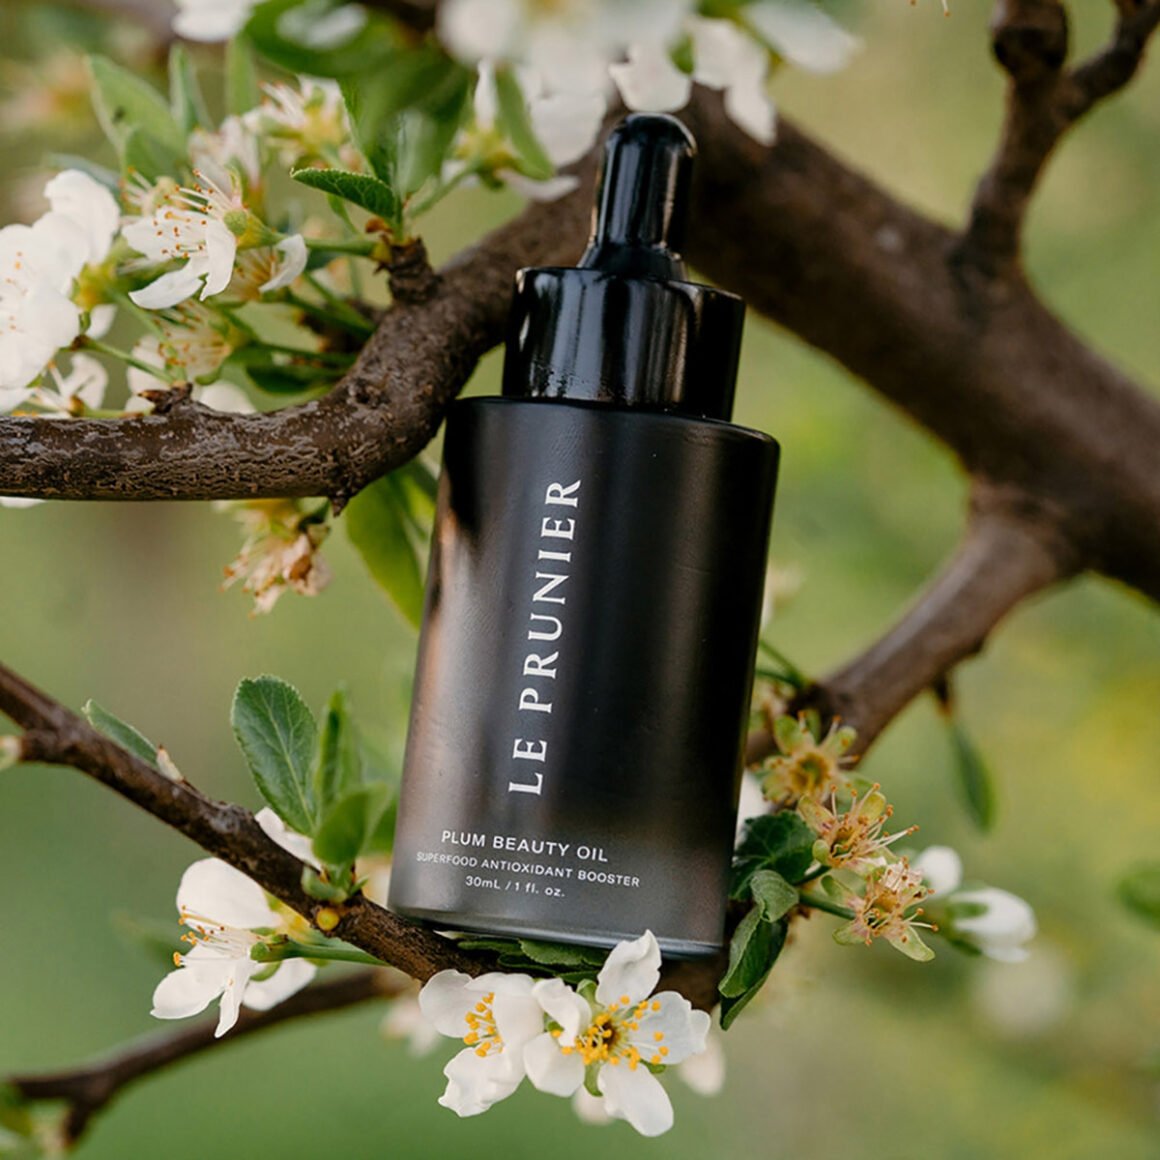 Shop Le Prunier Plum Beauty Oil at Inspire Beauty, take 15% off your first order, use code inspire15. Free shipping over $99 (Canada & USA).